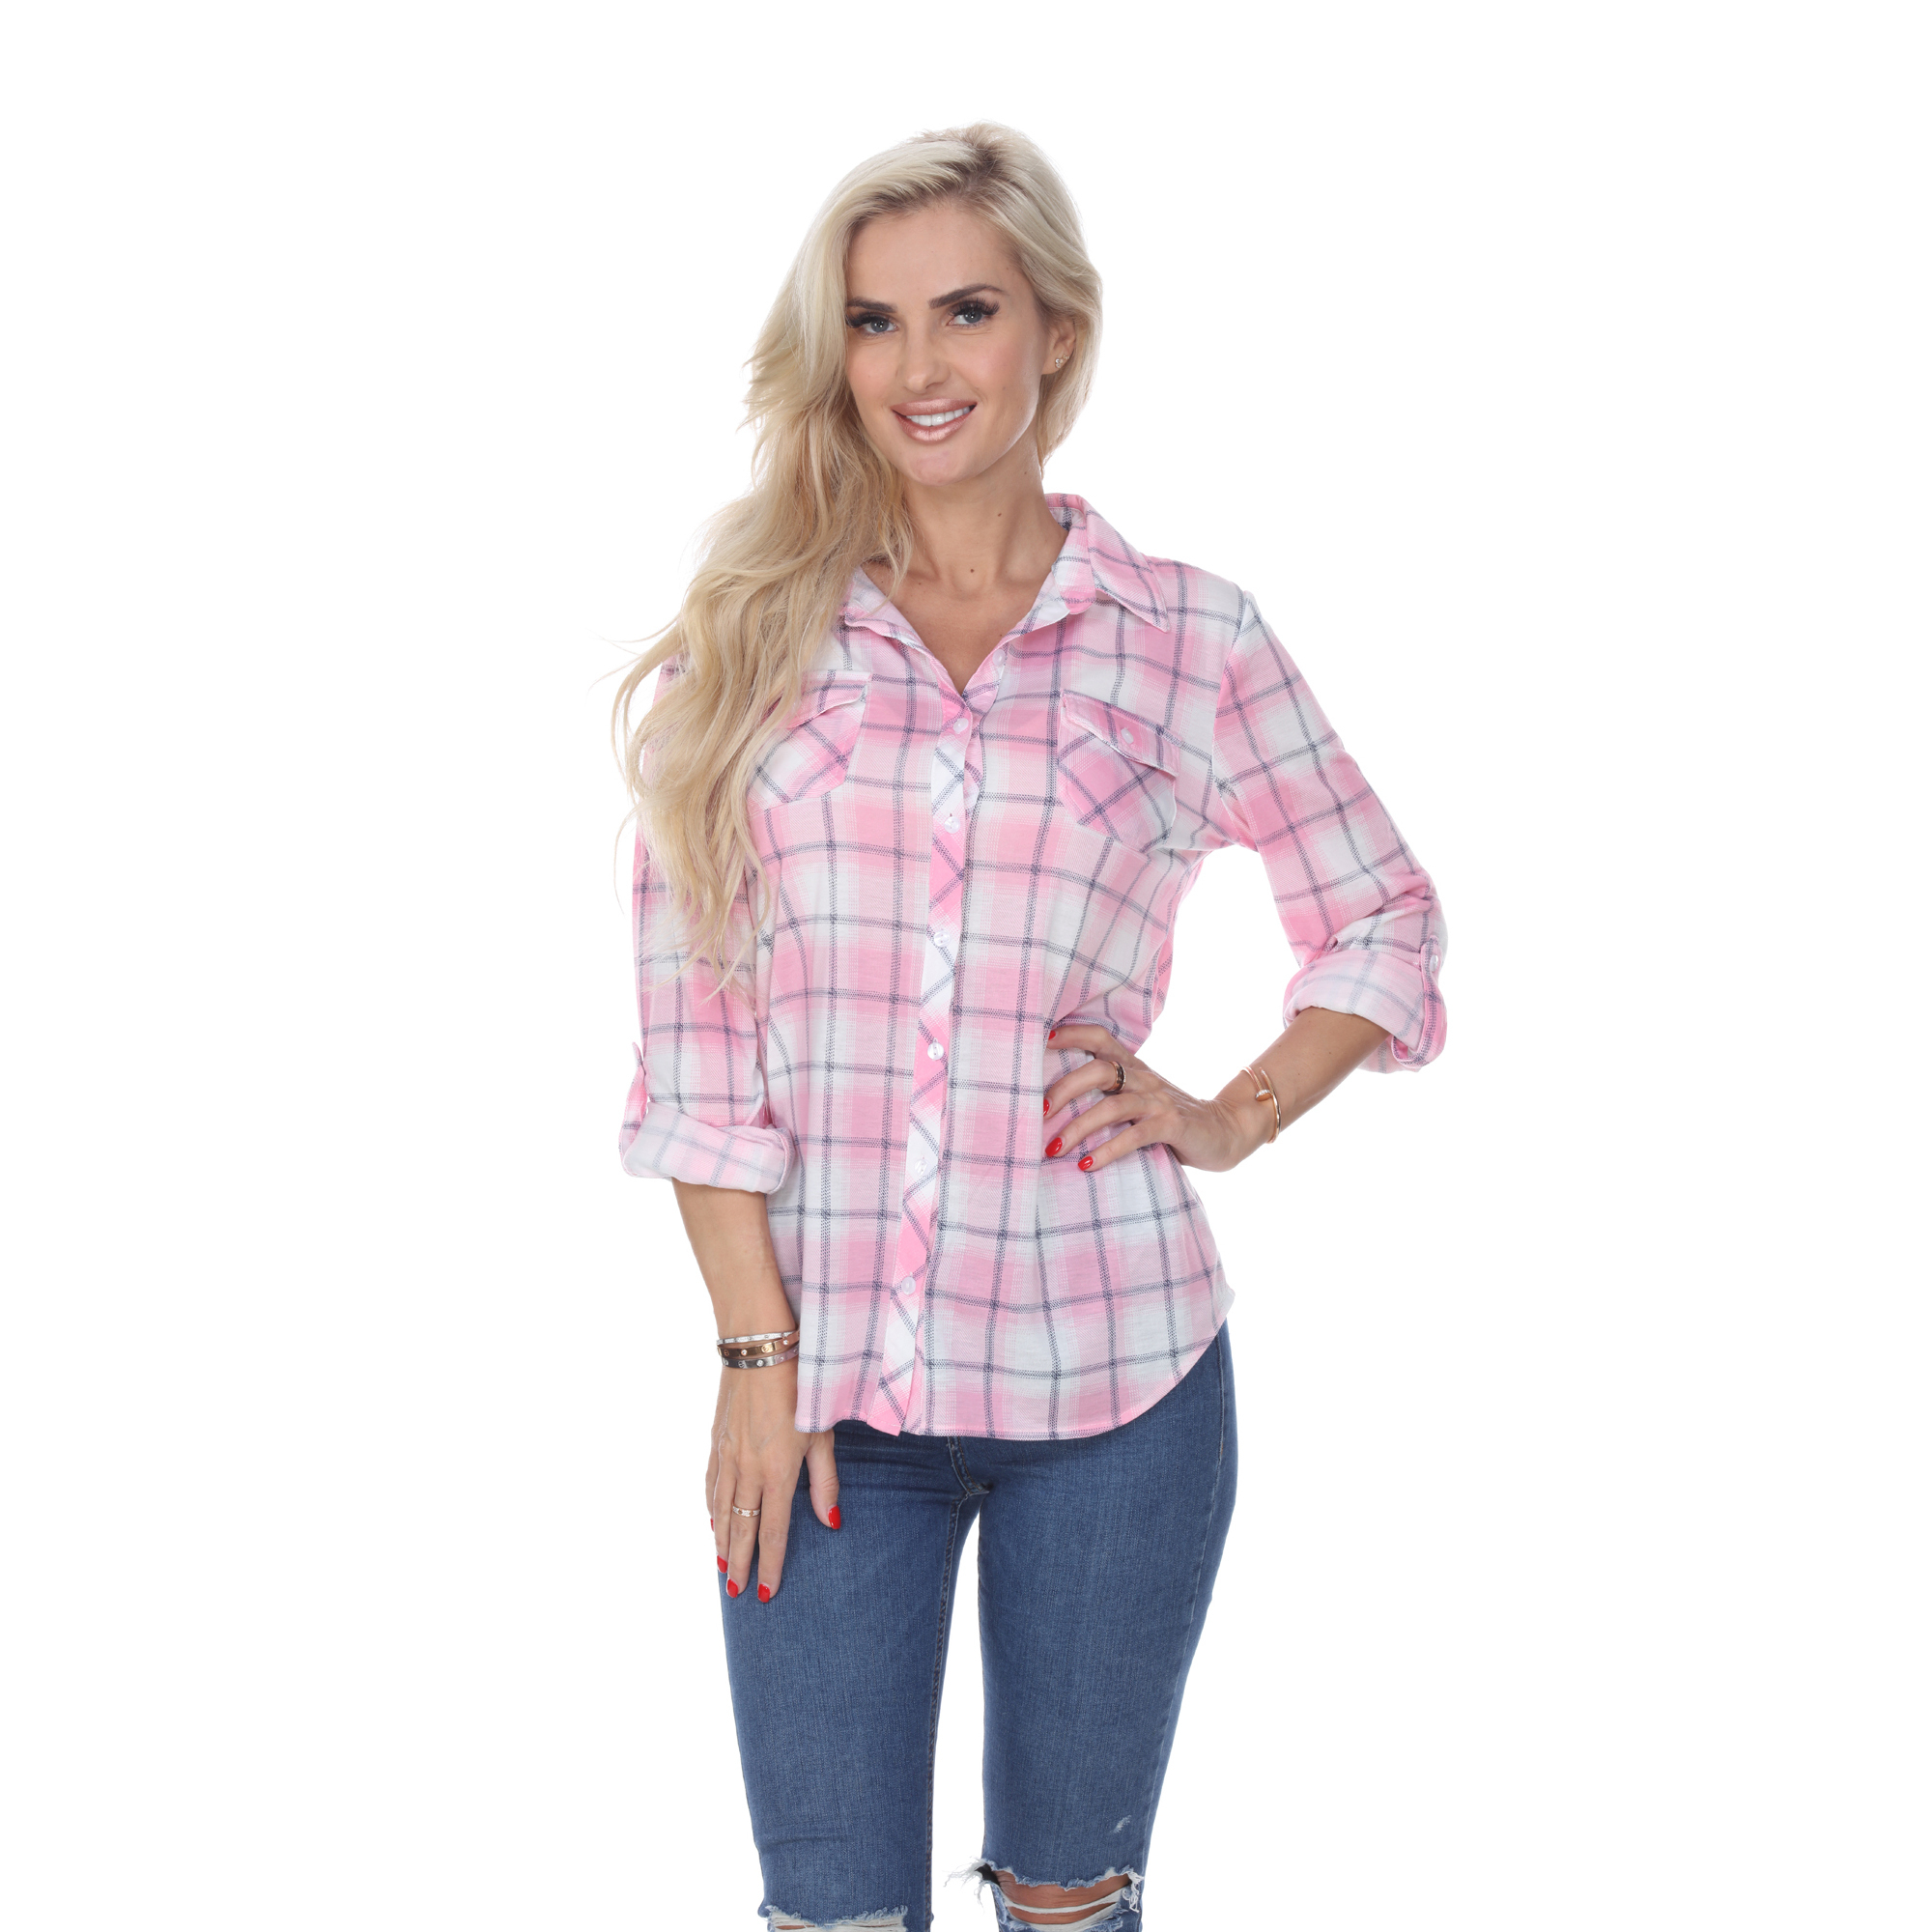 White Mark Women's Stretchy Plaid Flannel Shirt - Red/Black, Small